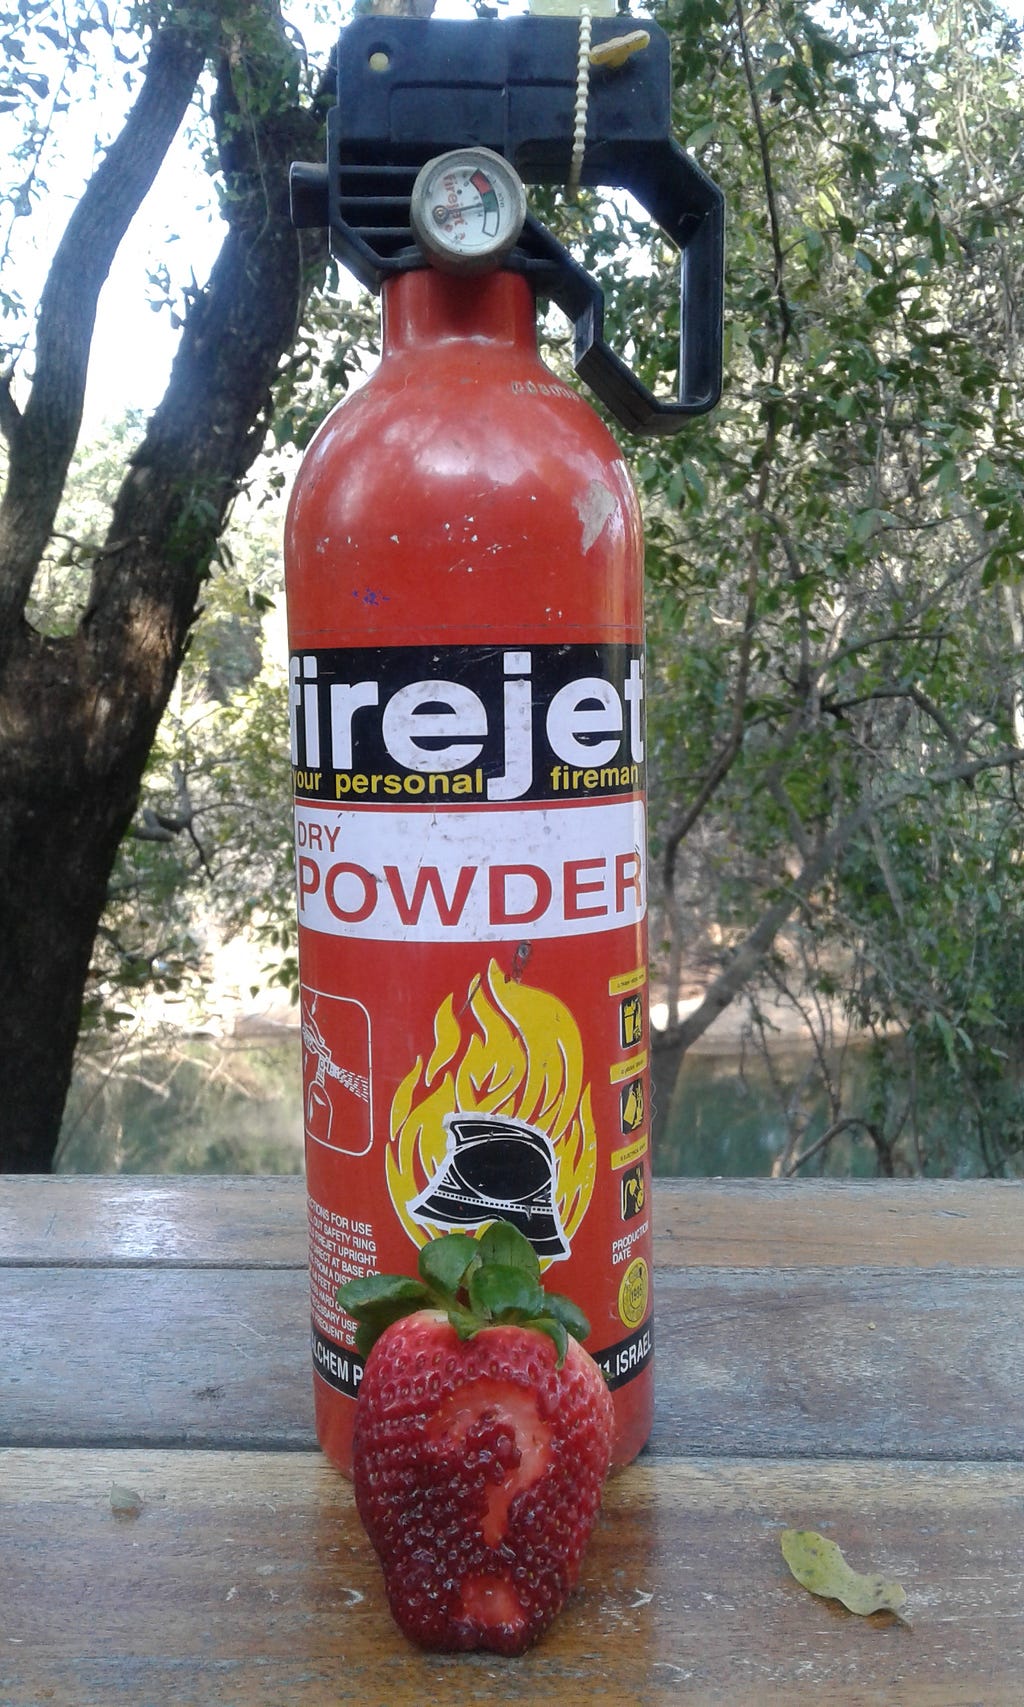 A small red fire-extinguisher and a strawberry with a carved-out question mark placed in front of it, with a river and trees in the background